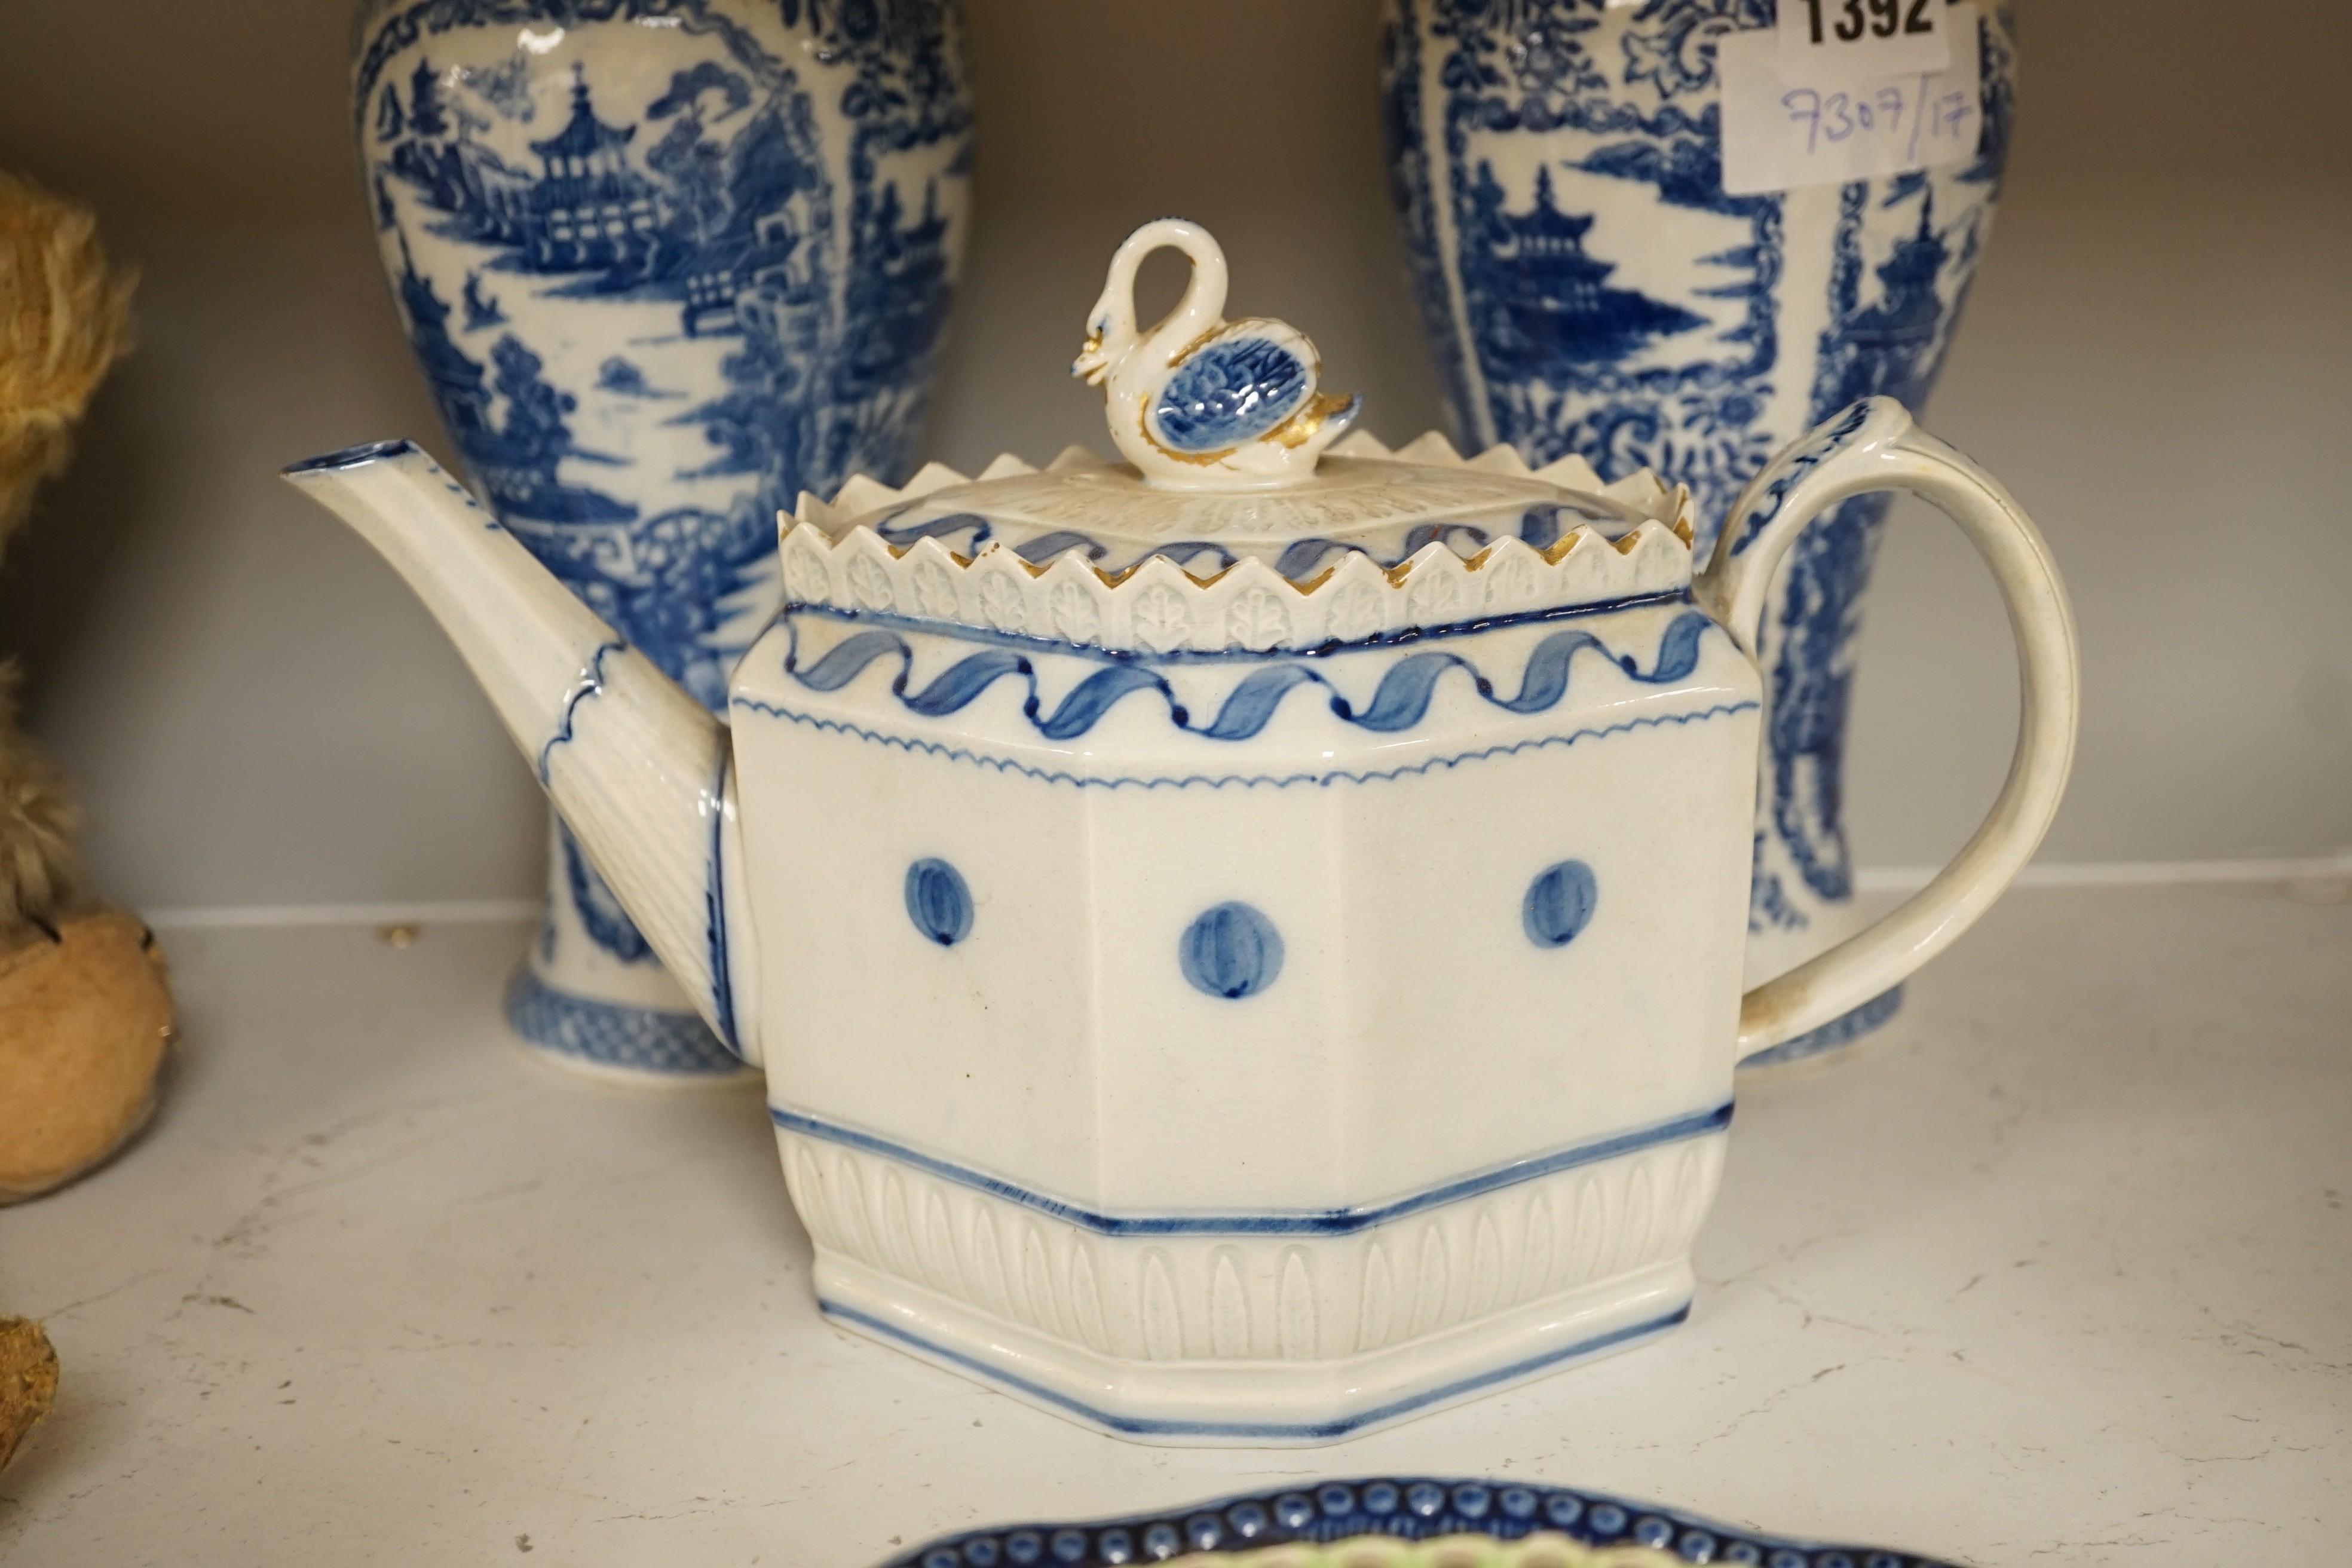 A pair of 19th century blue and white chinoiserie vases, a pearlware teapot, possibly Harley of Lane End, c.1805, three cream ware plates and two other plates, tallest 25cm